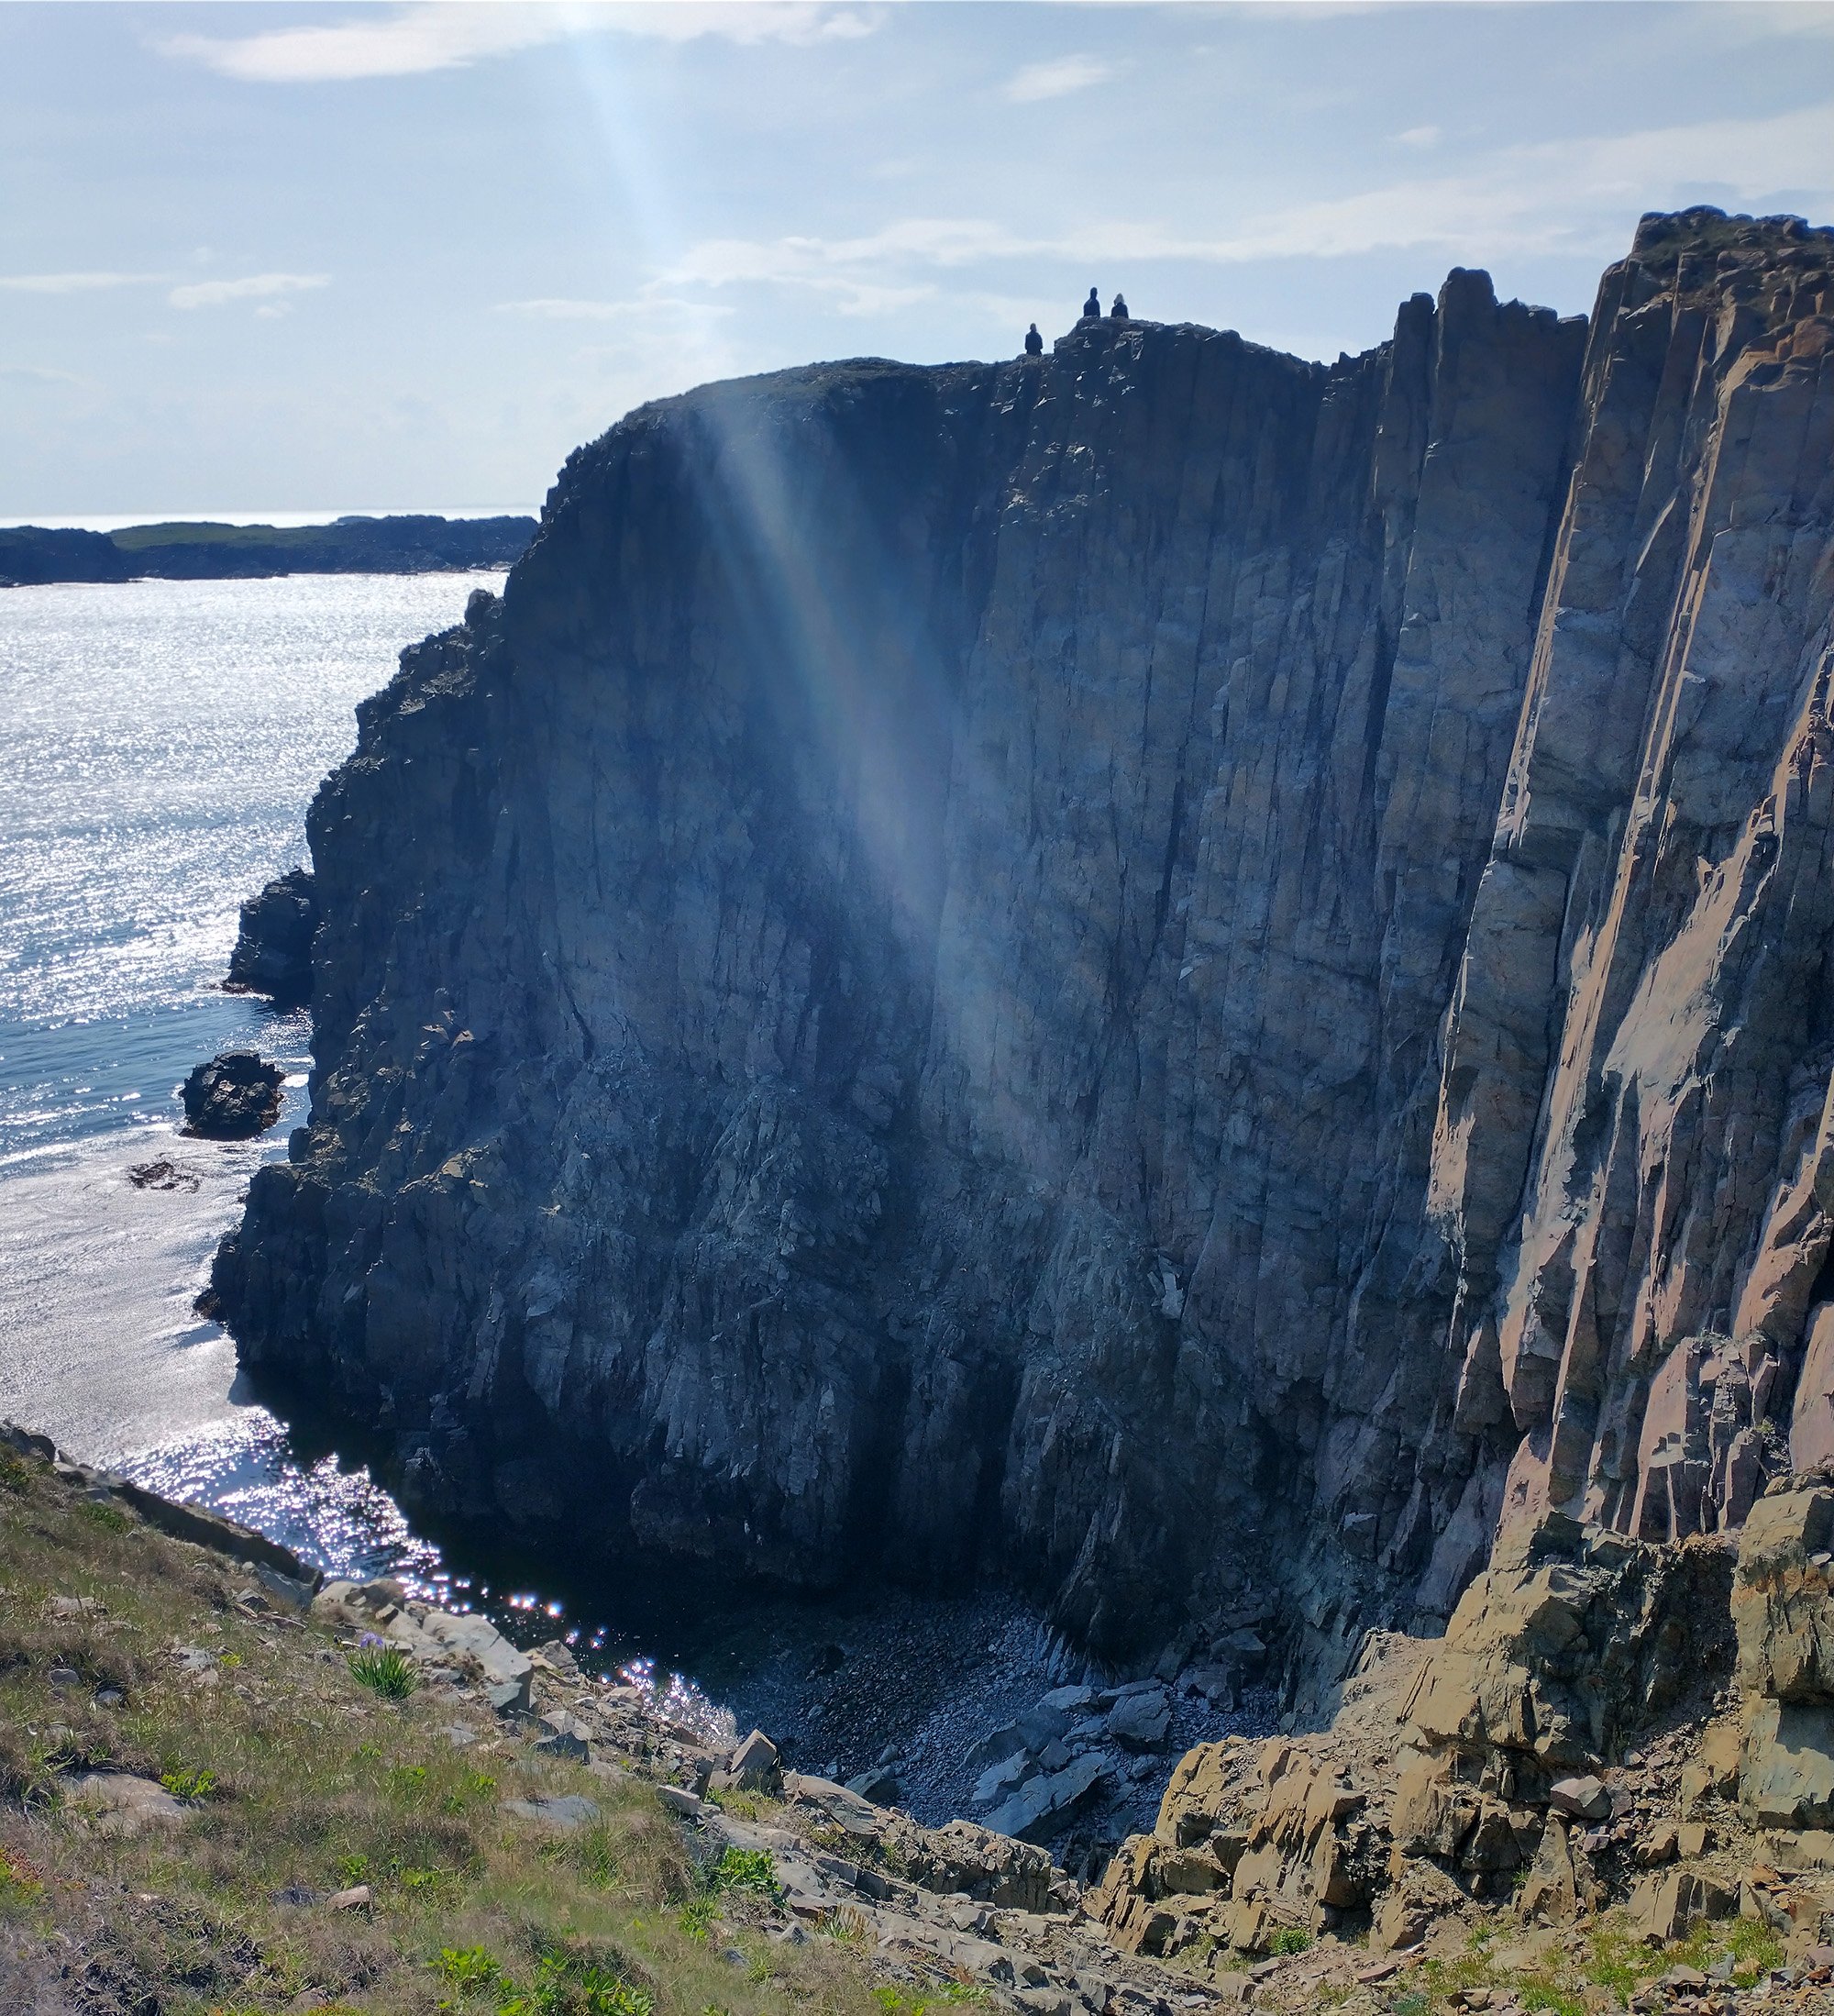 You can just walk as close to the edge of these cliffs as you feel comfortable. Really amazing.